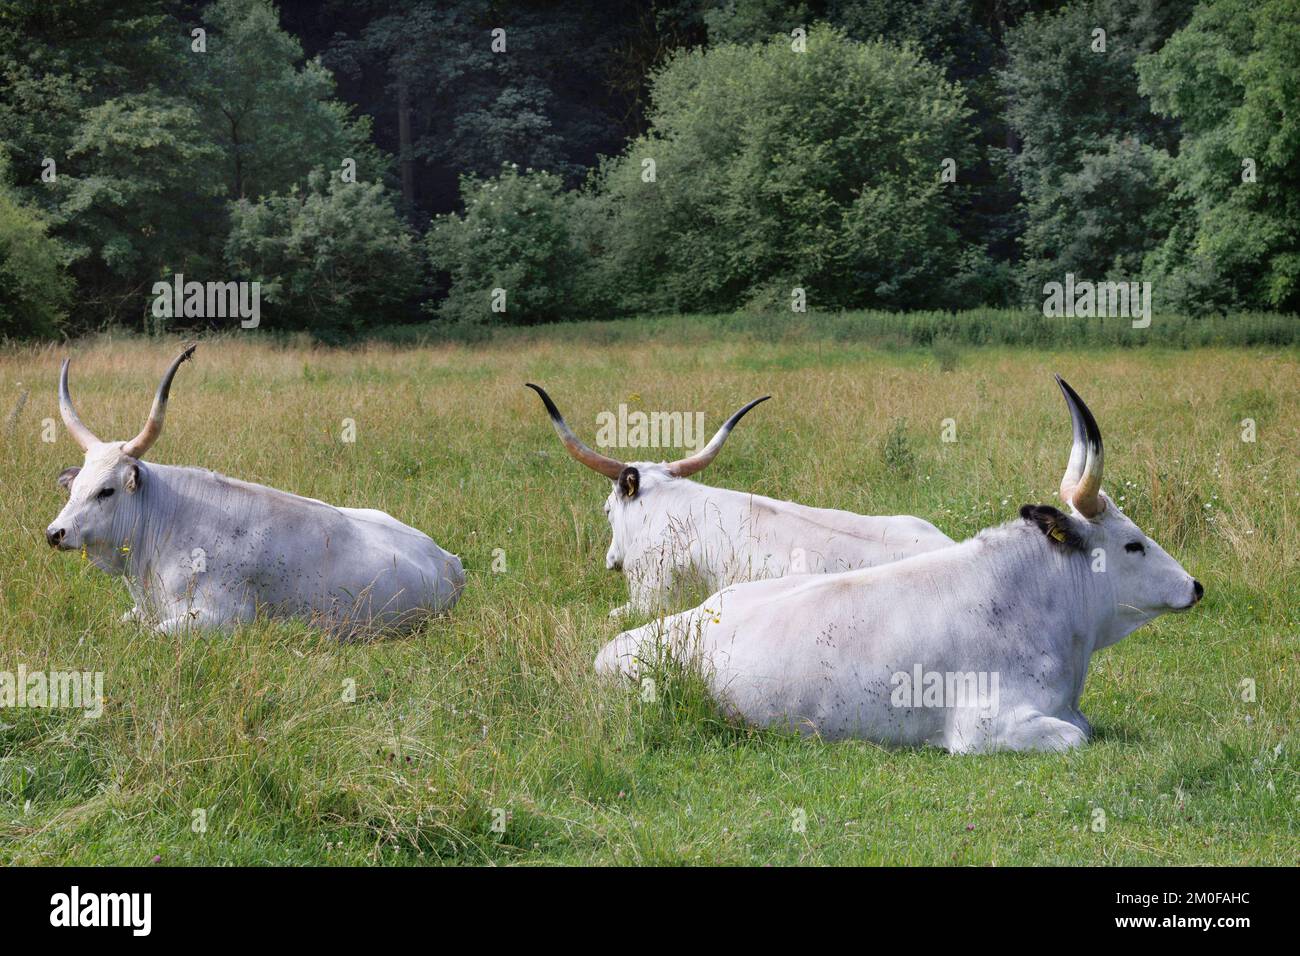 Hungarian Steppe Cattle, Hungarian Grey Cattle, Hungarian Podolian Steppe Cattle (Bos primigenius f. taurus), cows resting in a pasture, ruminating, Stock Photo